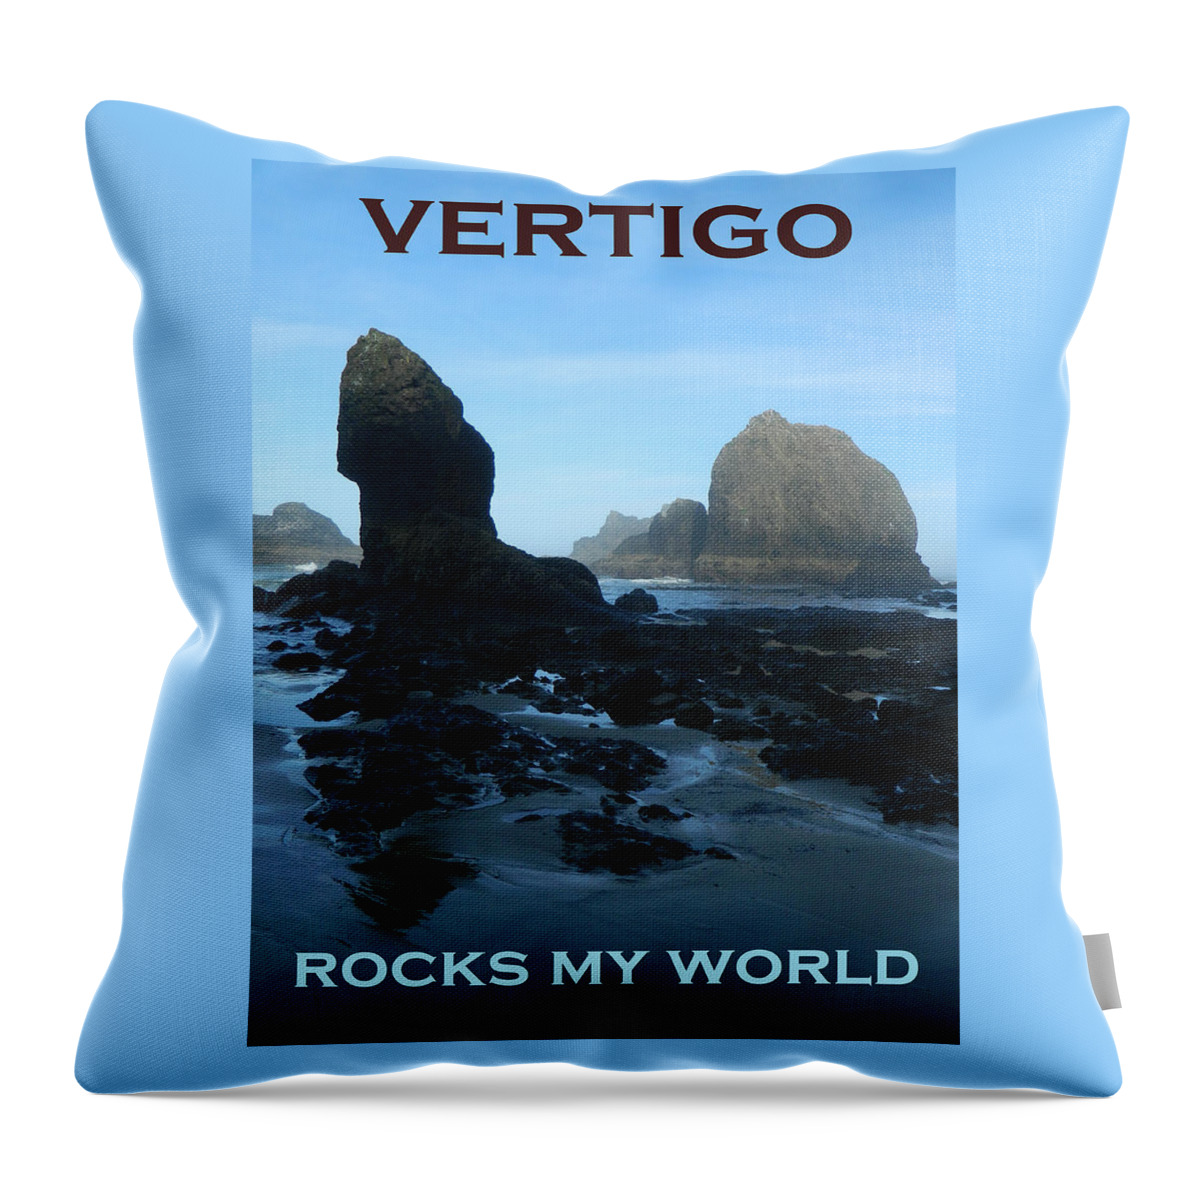 An Early Morning Low Tide Beach Scene With Large Rocks At Oceanside Beach Throw Pillow featuring the photograph Vertigo Rocks My World Two by Gallery Of Hope 